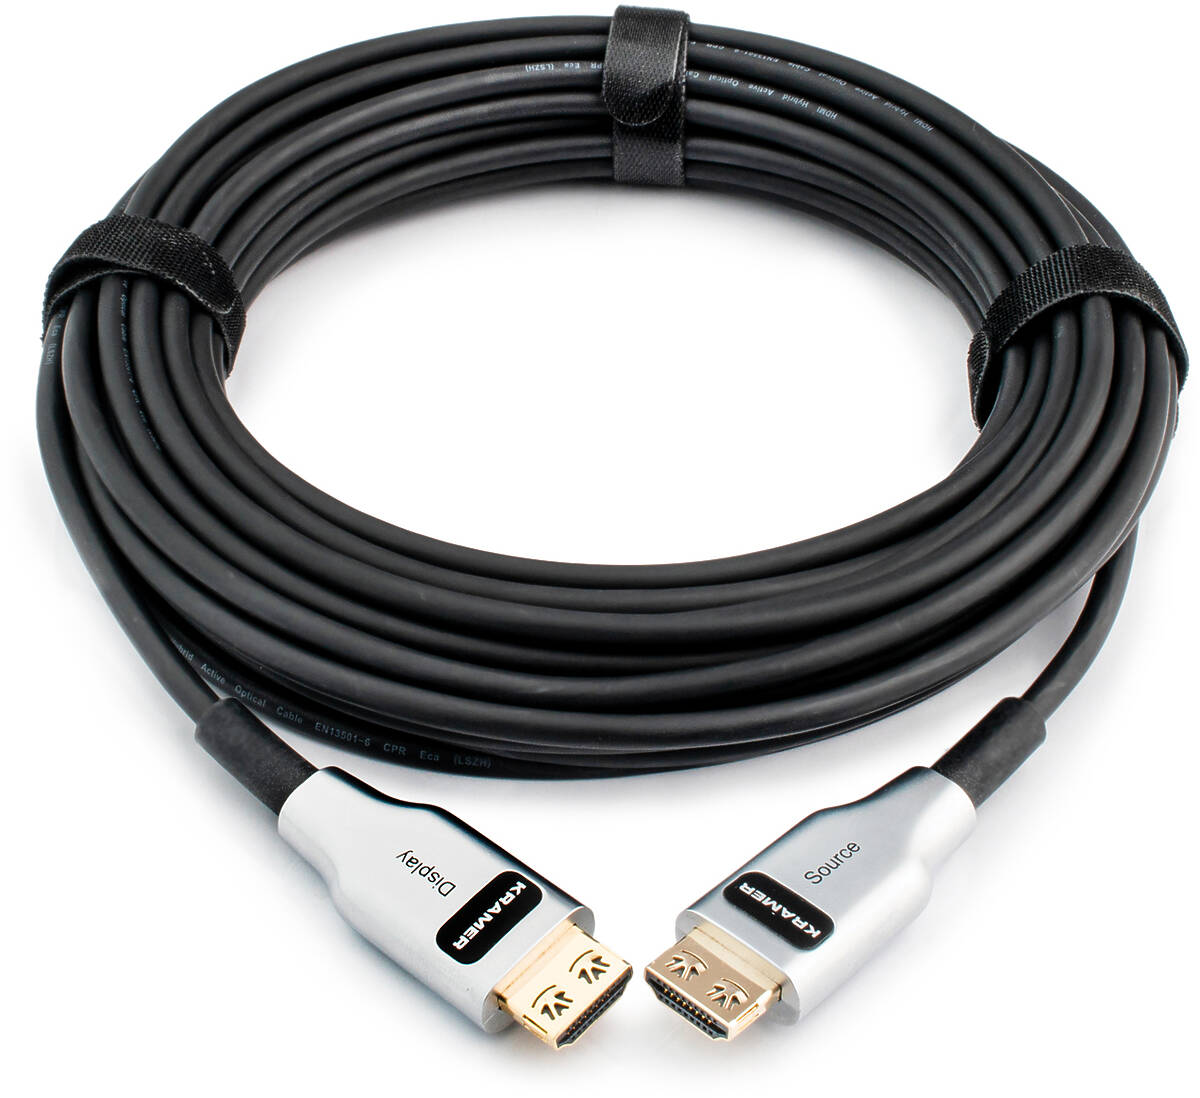 CLS-AOCH/60F-197 60.00m Kramer CLS-AOCH/60F cable product image. Click to enlarge.